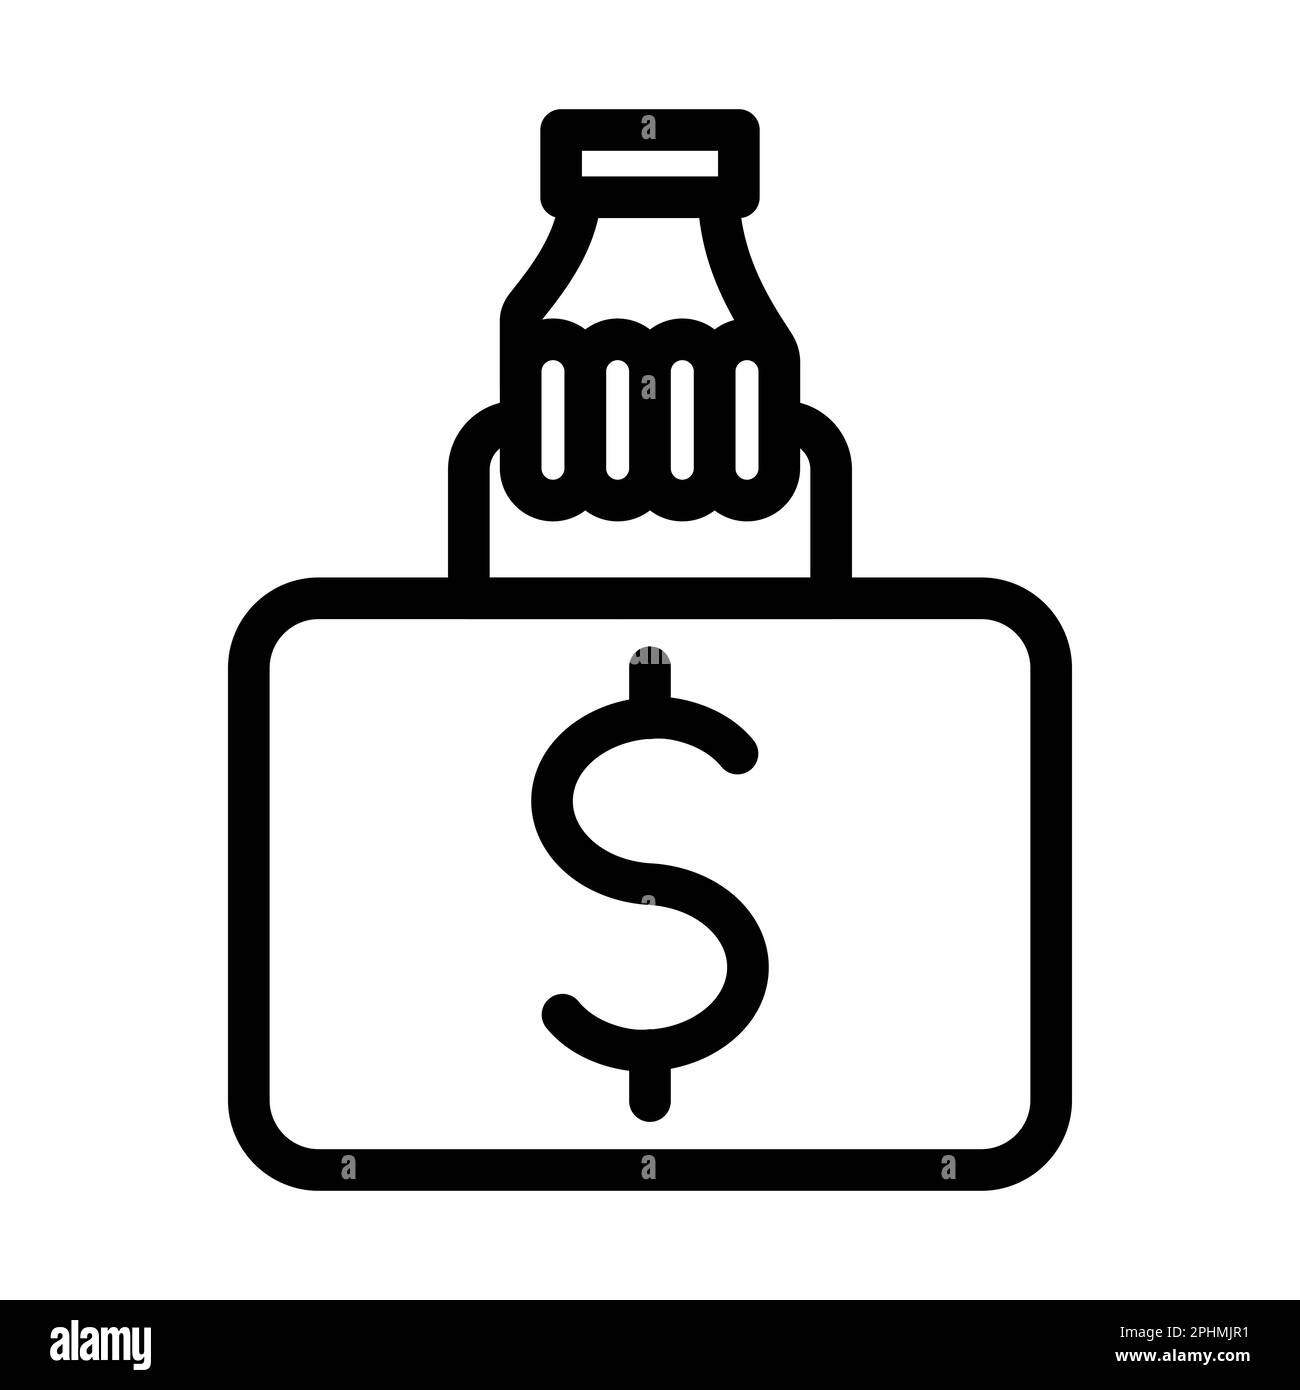 Money Laundering Vector Thick Line Icon For Personal And Commercial Use. Stock Photo